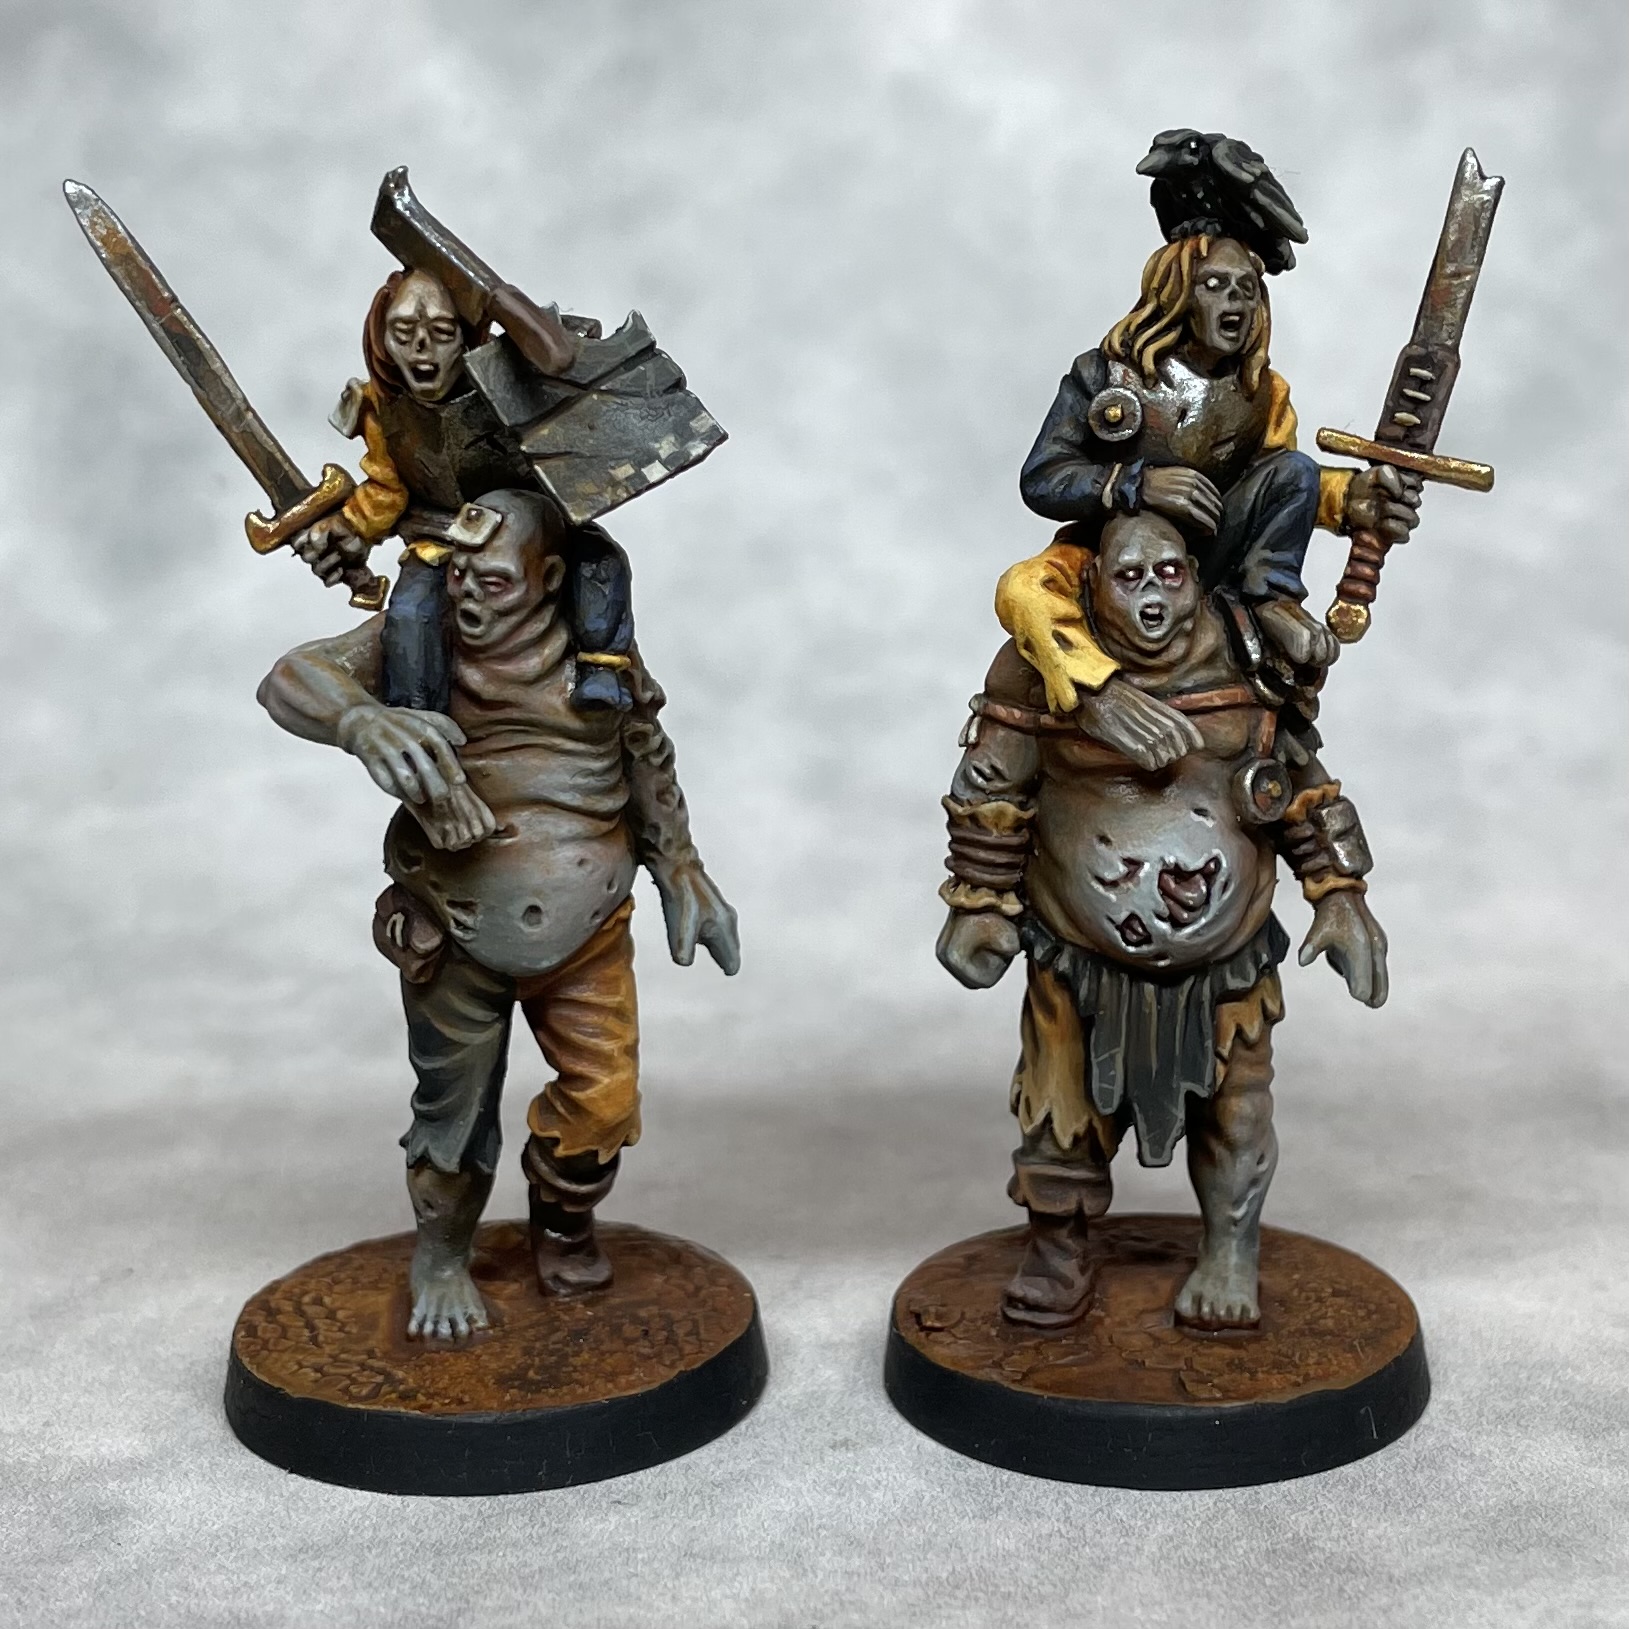 The Zombie Ritters - Black Crab Miniatures